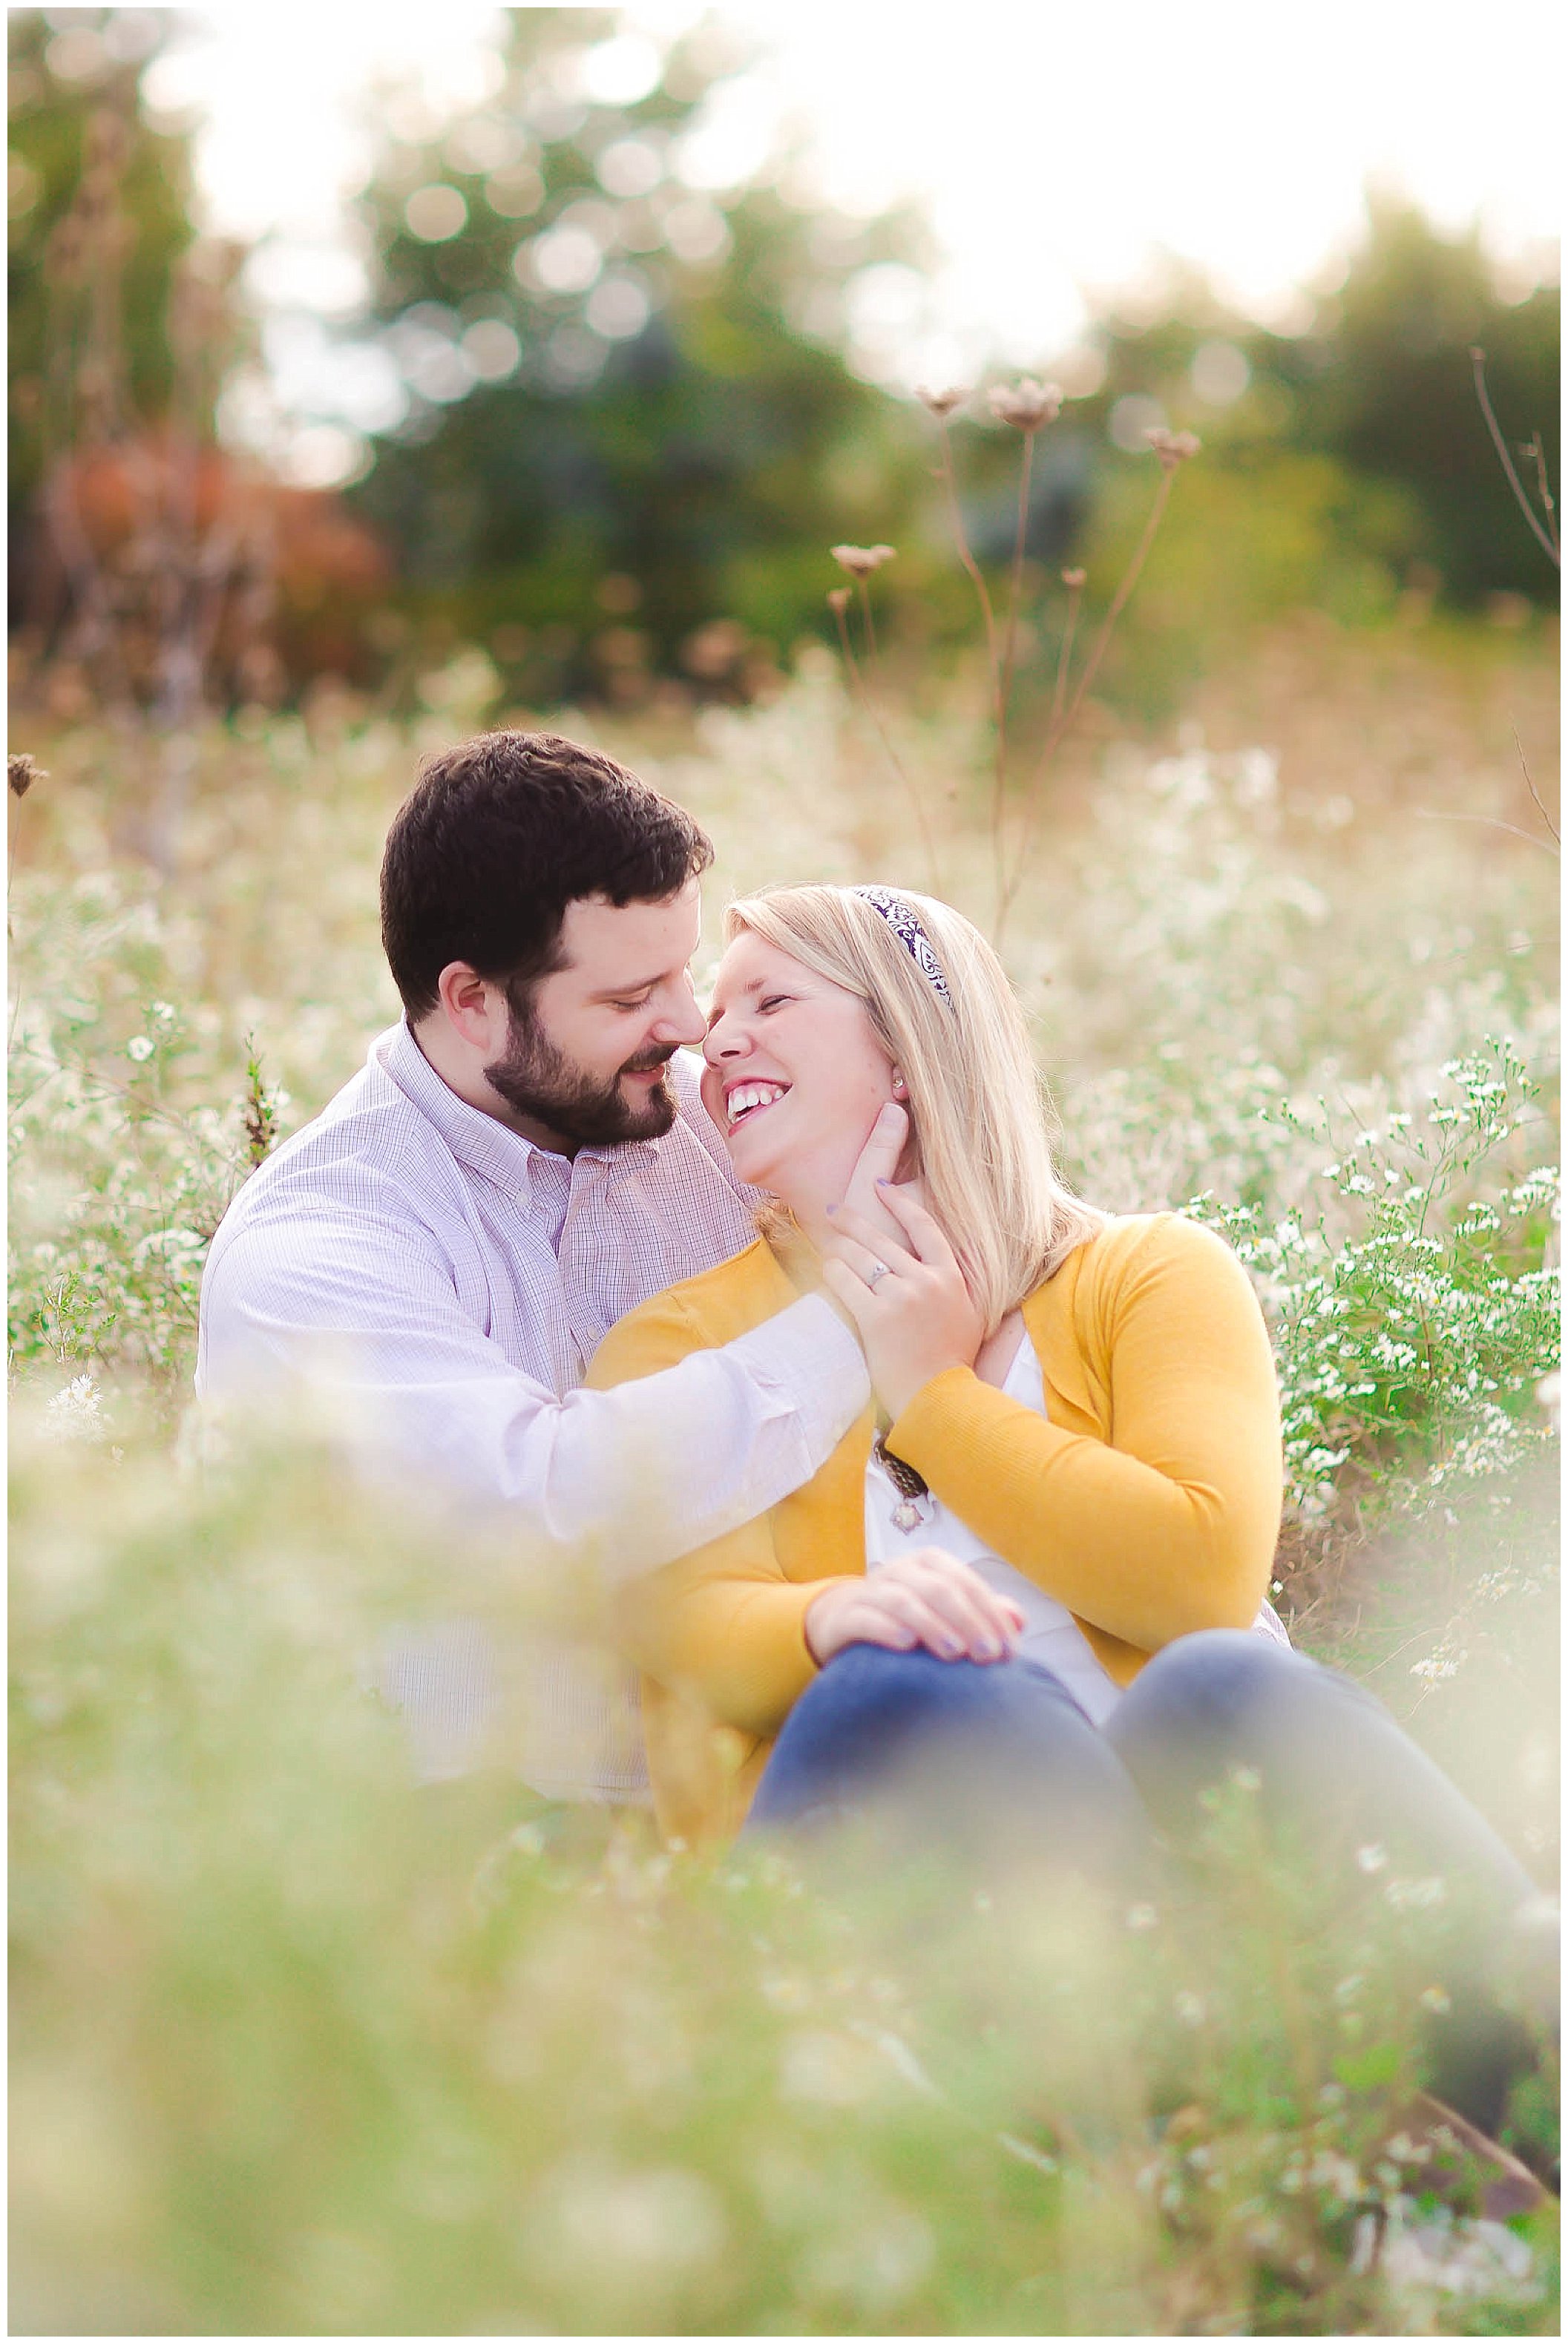 Sunshine filled engagement session in a field of wildflowers, Fort Wayne Indiana Wedding Photographer_0009.jpg